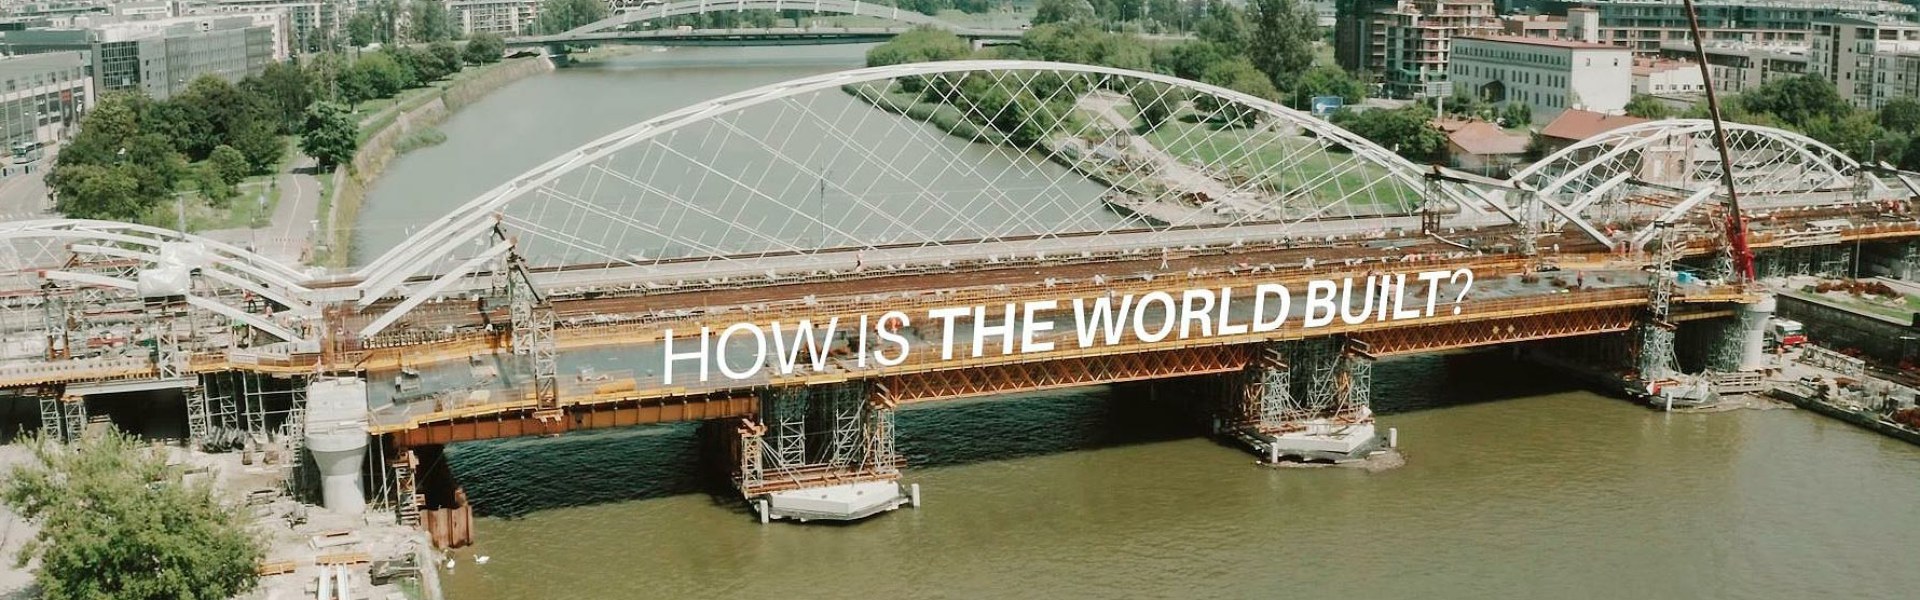 How is the world built?